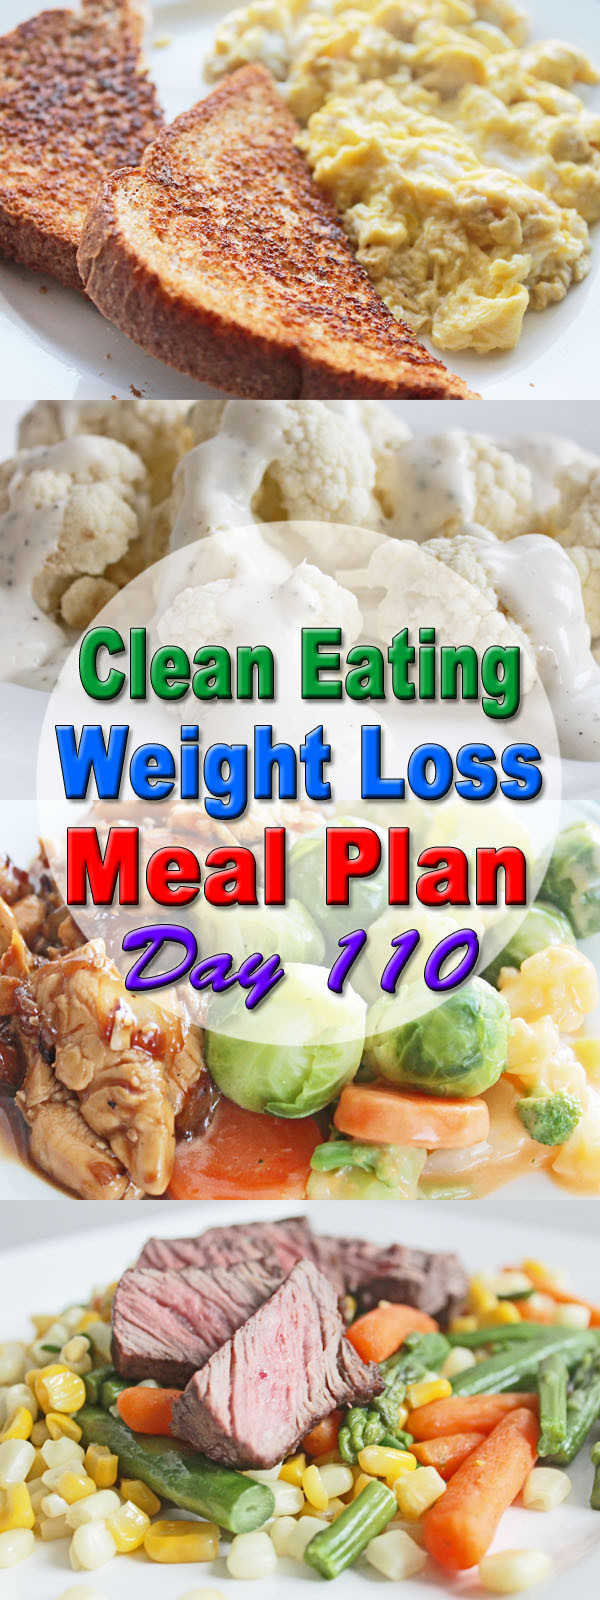 Clean Eating For Weight Loss
 Clean Eating Weight Loss Meal Plan 110